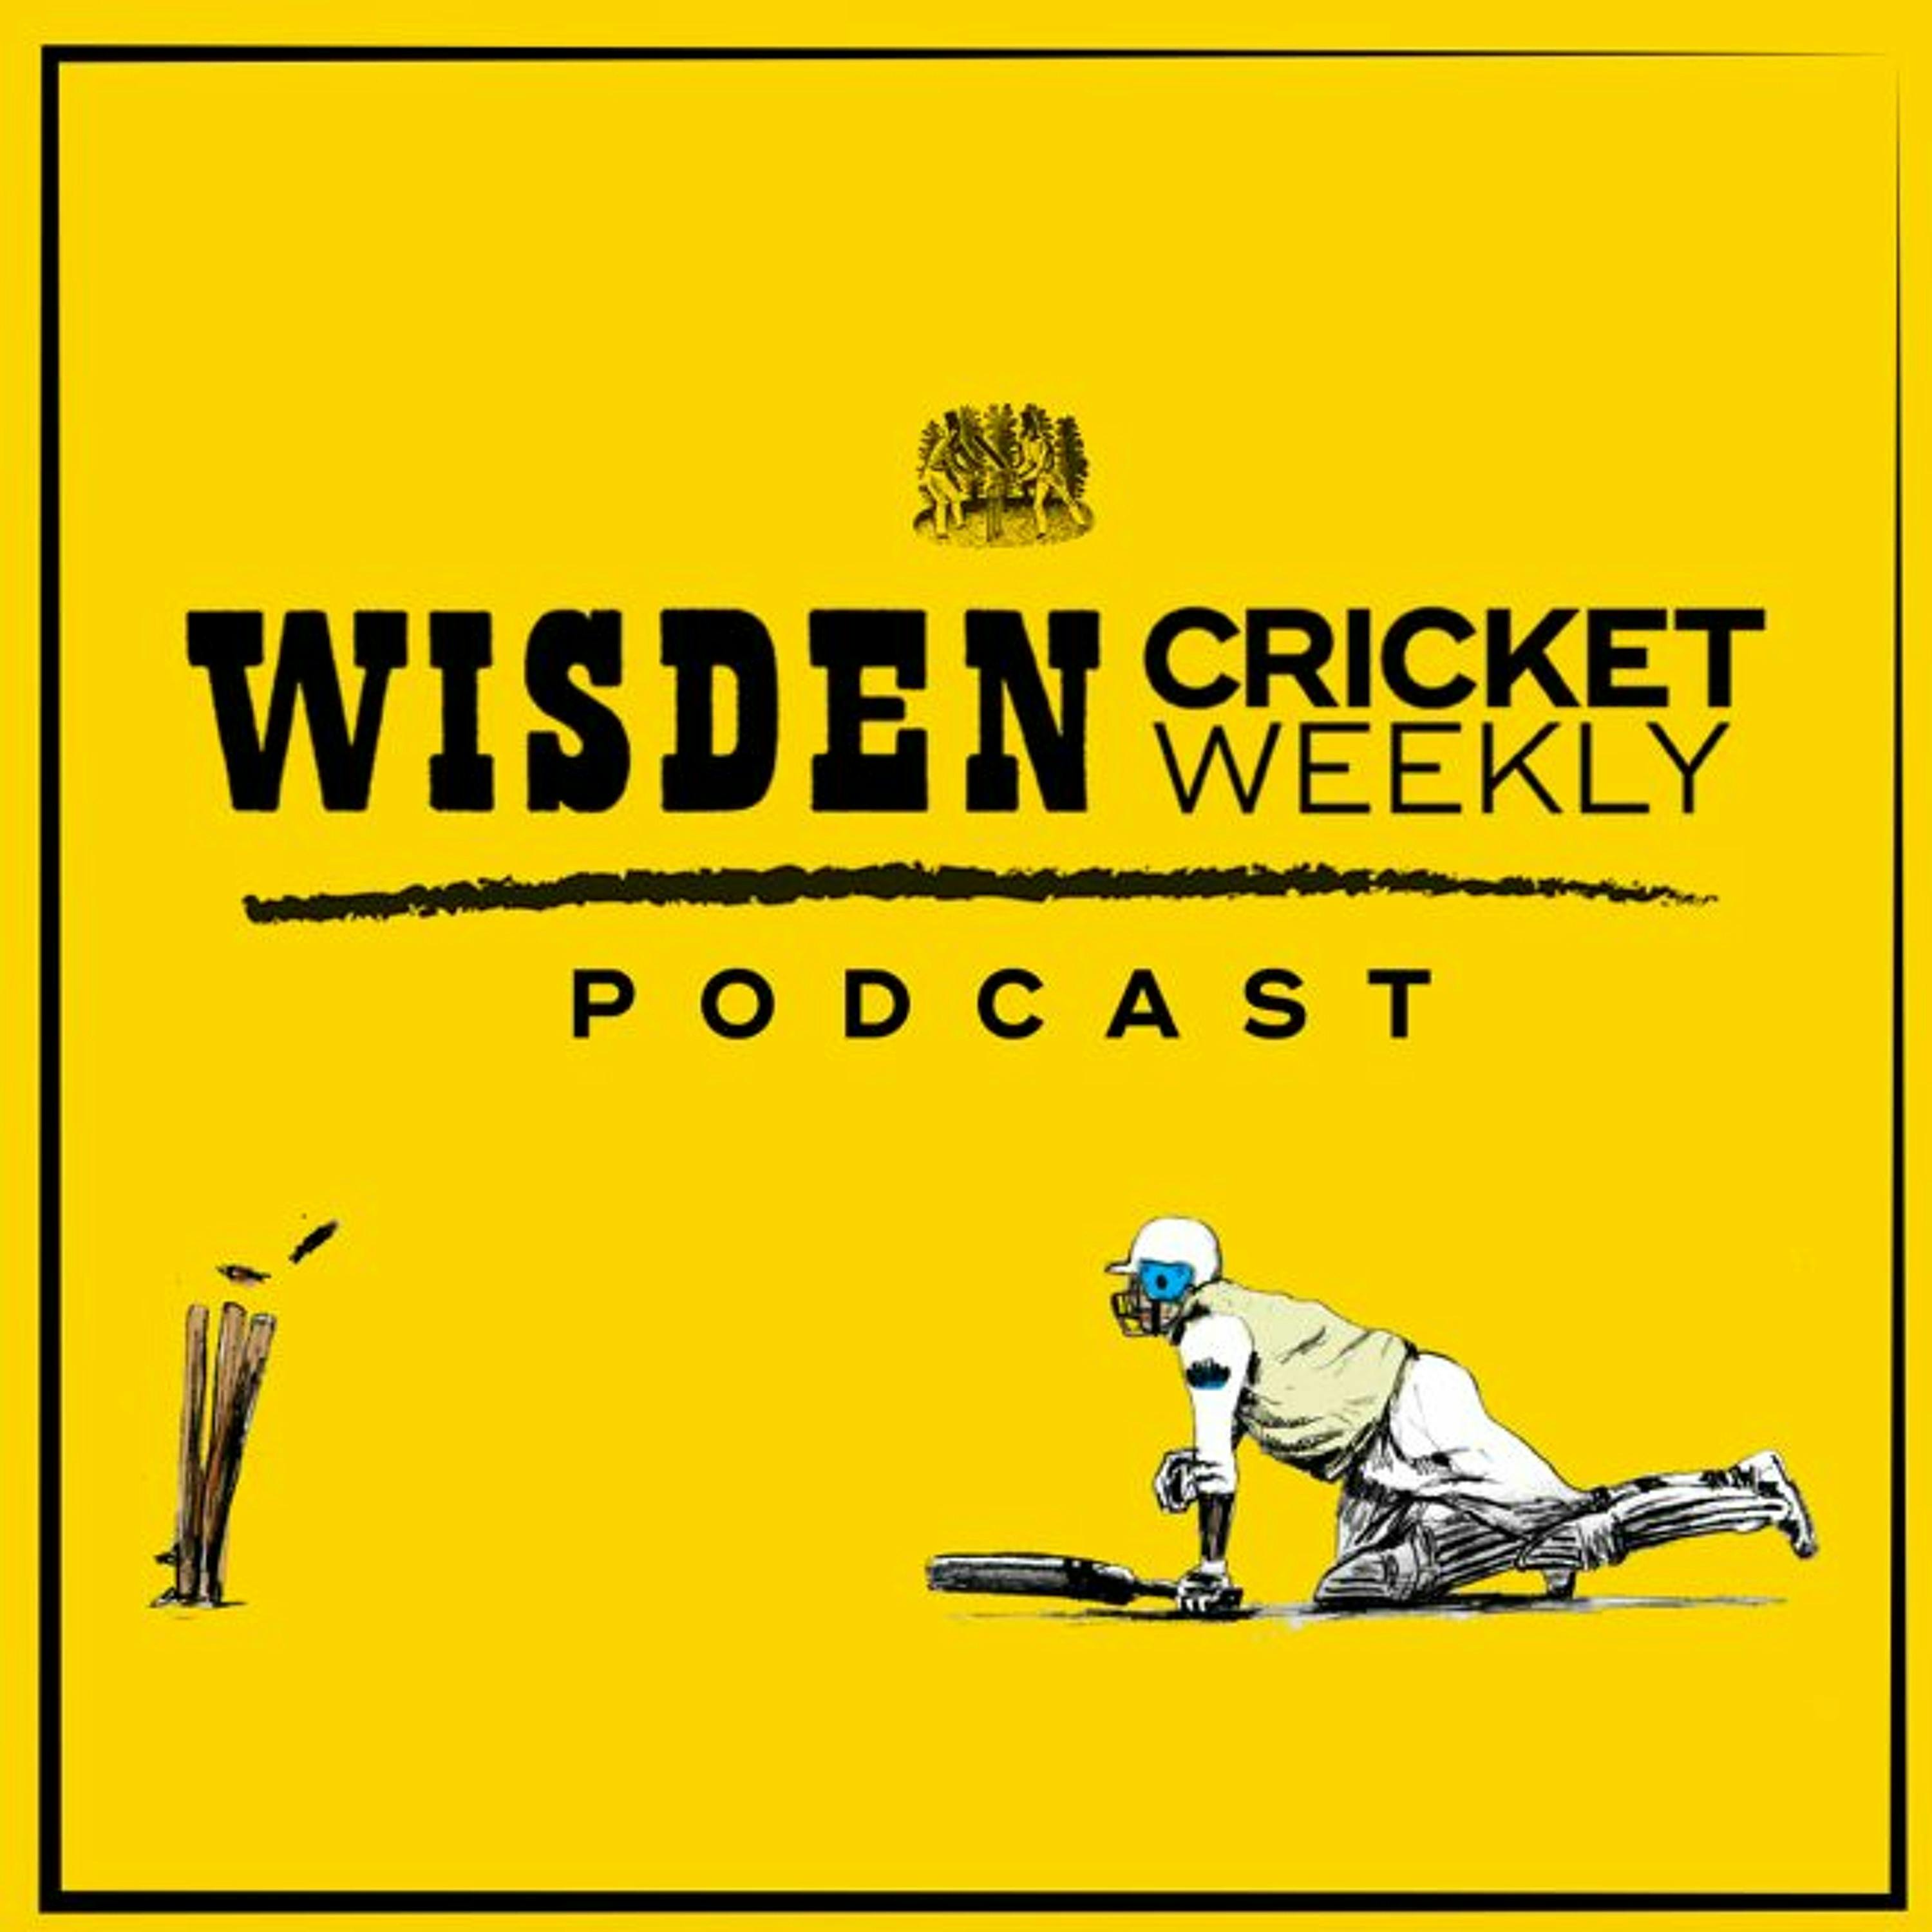 IPL fireworks, Watson retires, rapid young quicks and Denly joins the show